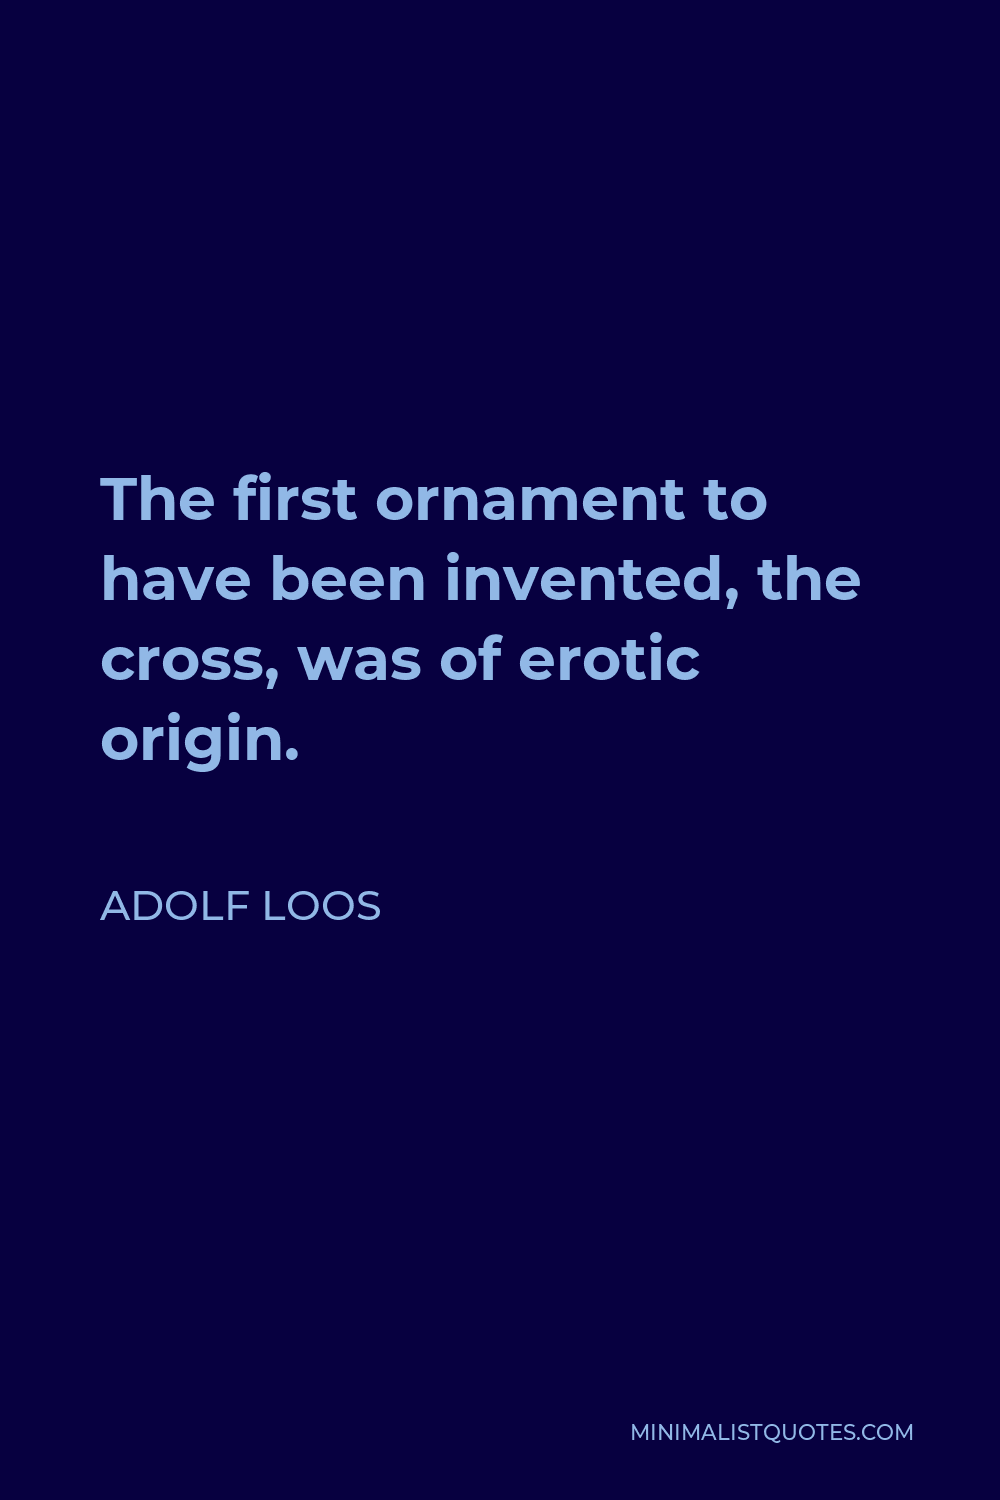 Adolf Loos Quote - The first ornament to have been invented, the cross, was of erotic origin.